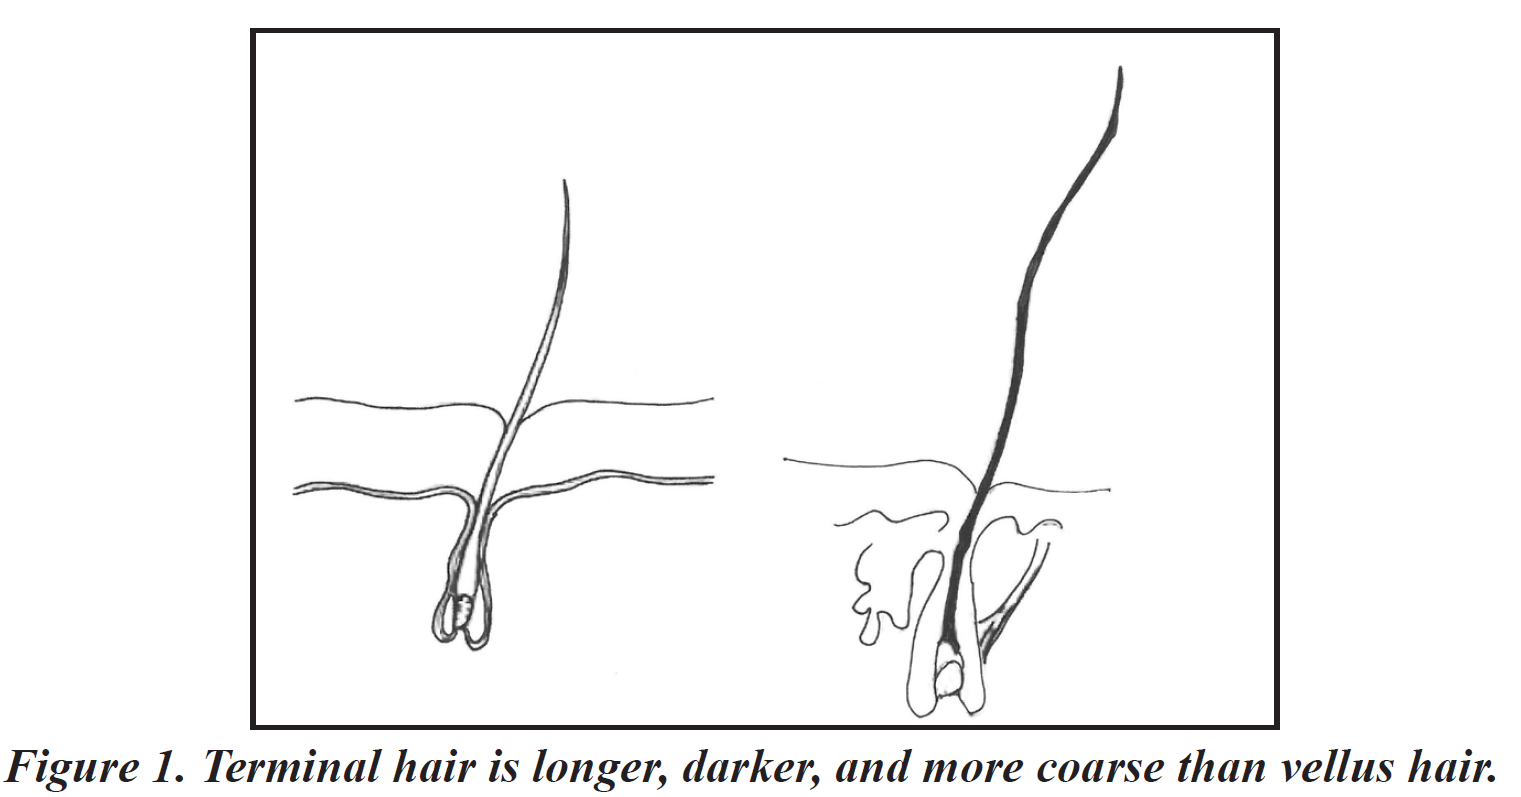 excess of hair growth - Lotus Flower PCOS